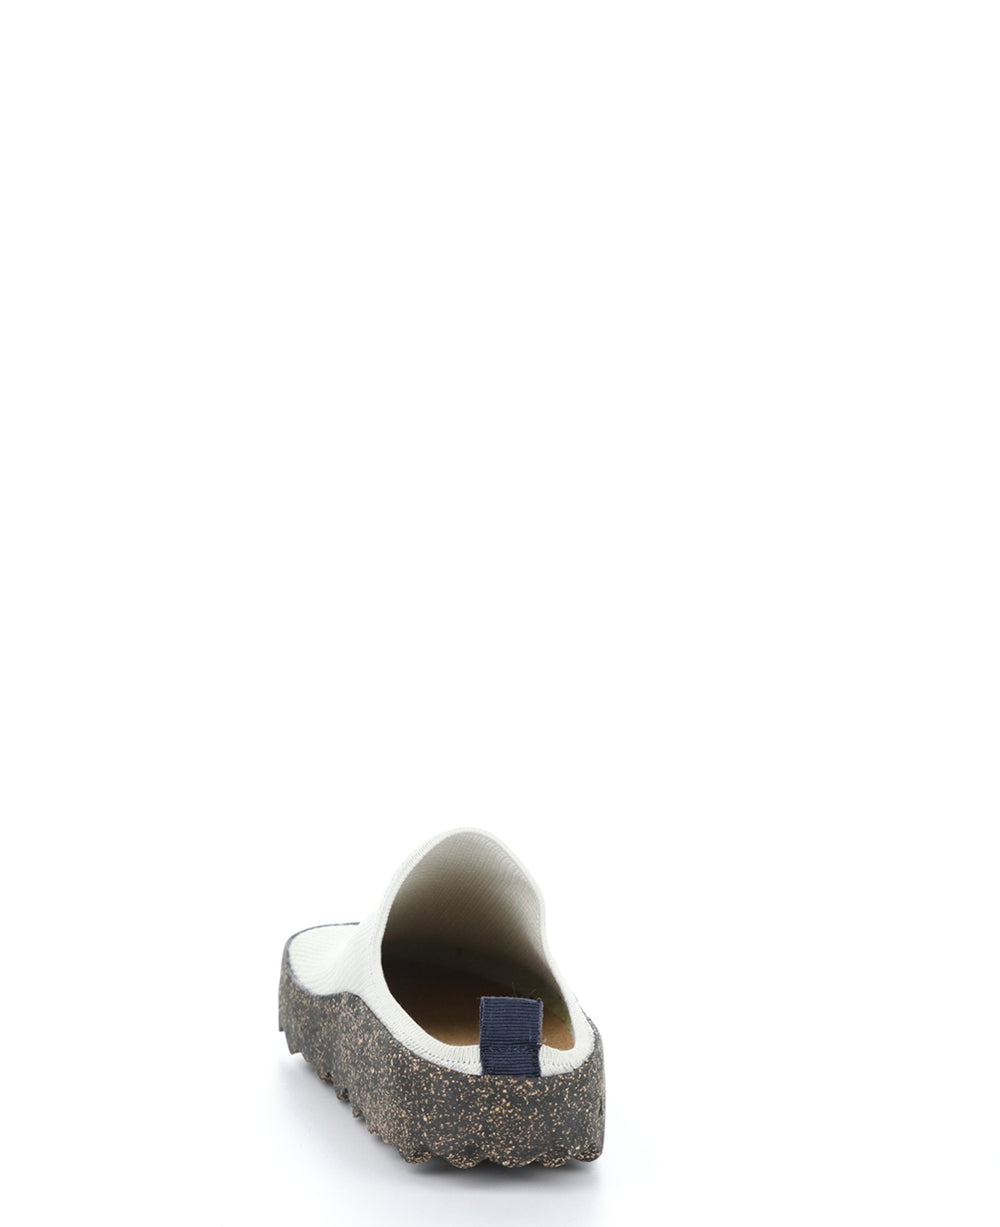 CLOG105ASPM WARM GREY/BLACK Slip-on Shoes|CLOG105ASPM Chaussures à Bout Rond in Gris